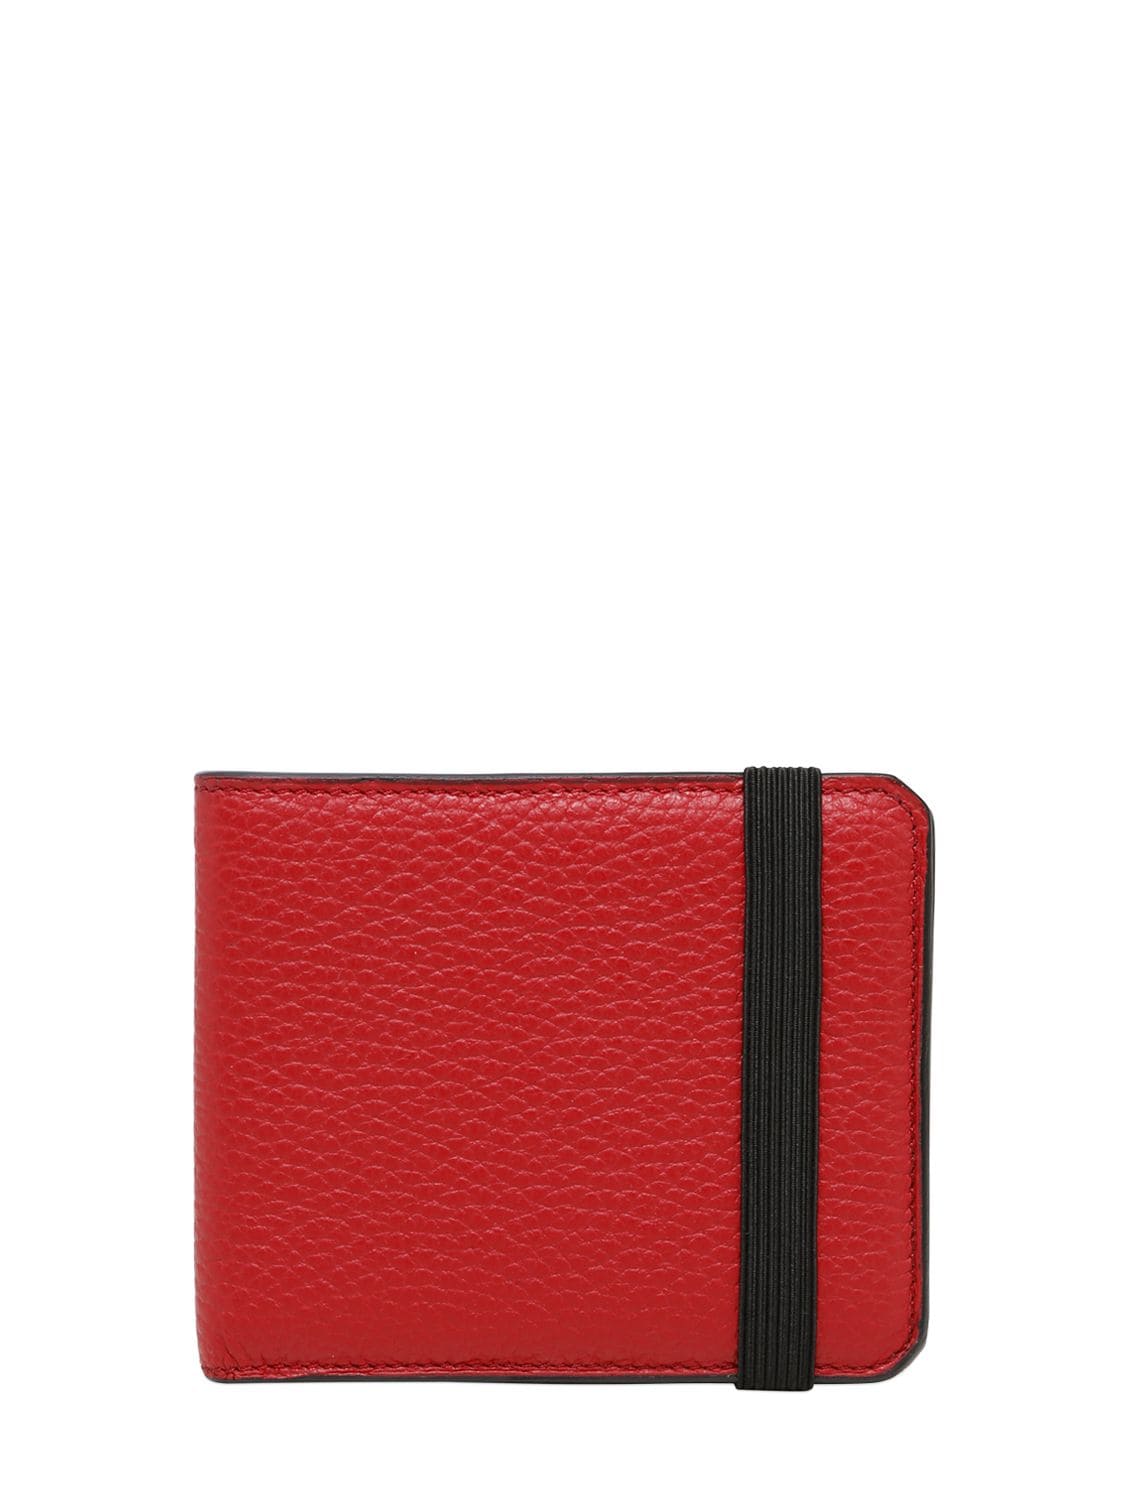 Aizea Soft Leather Classic Wallet In Red